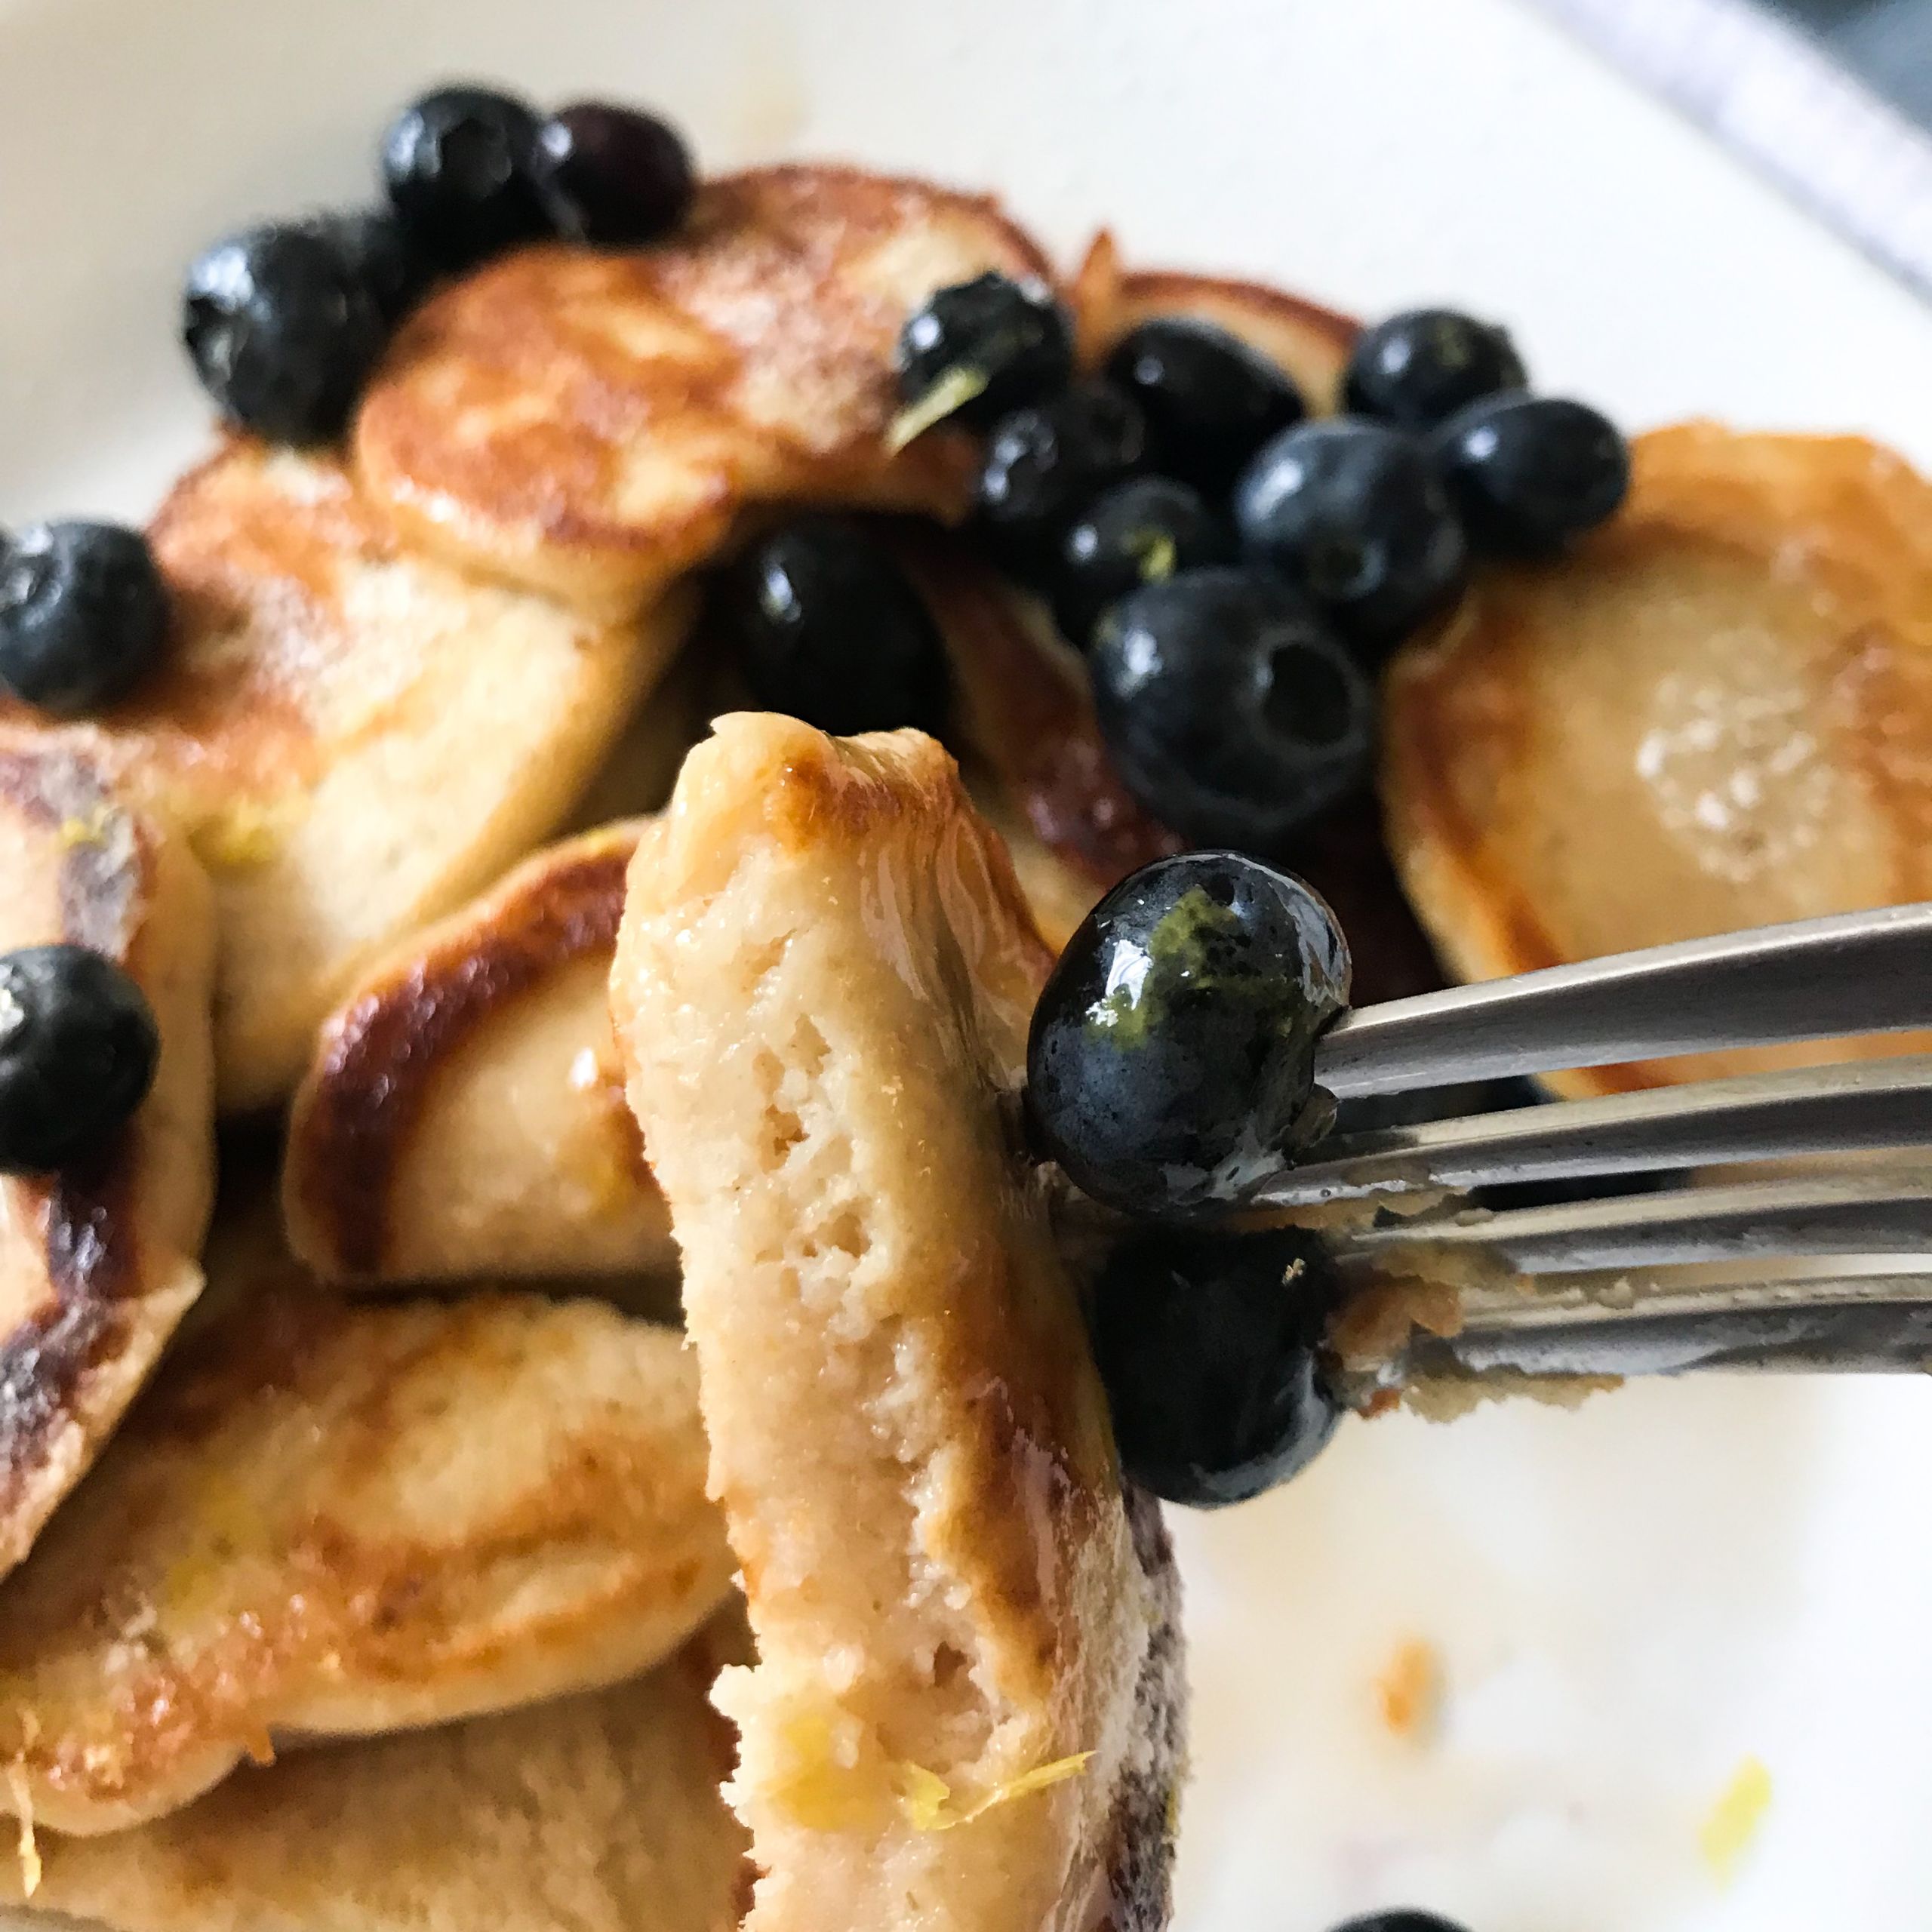 forkful of pancakes and berries